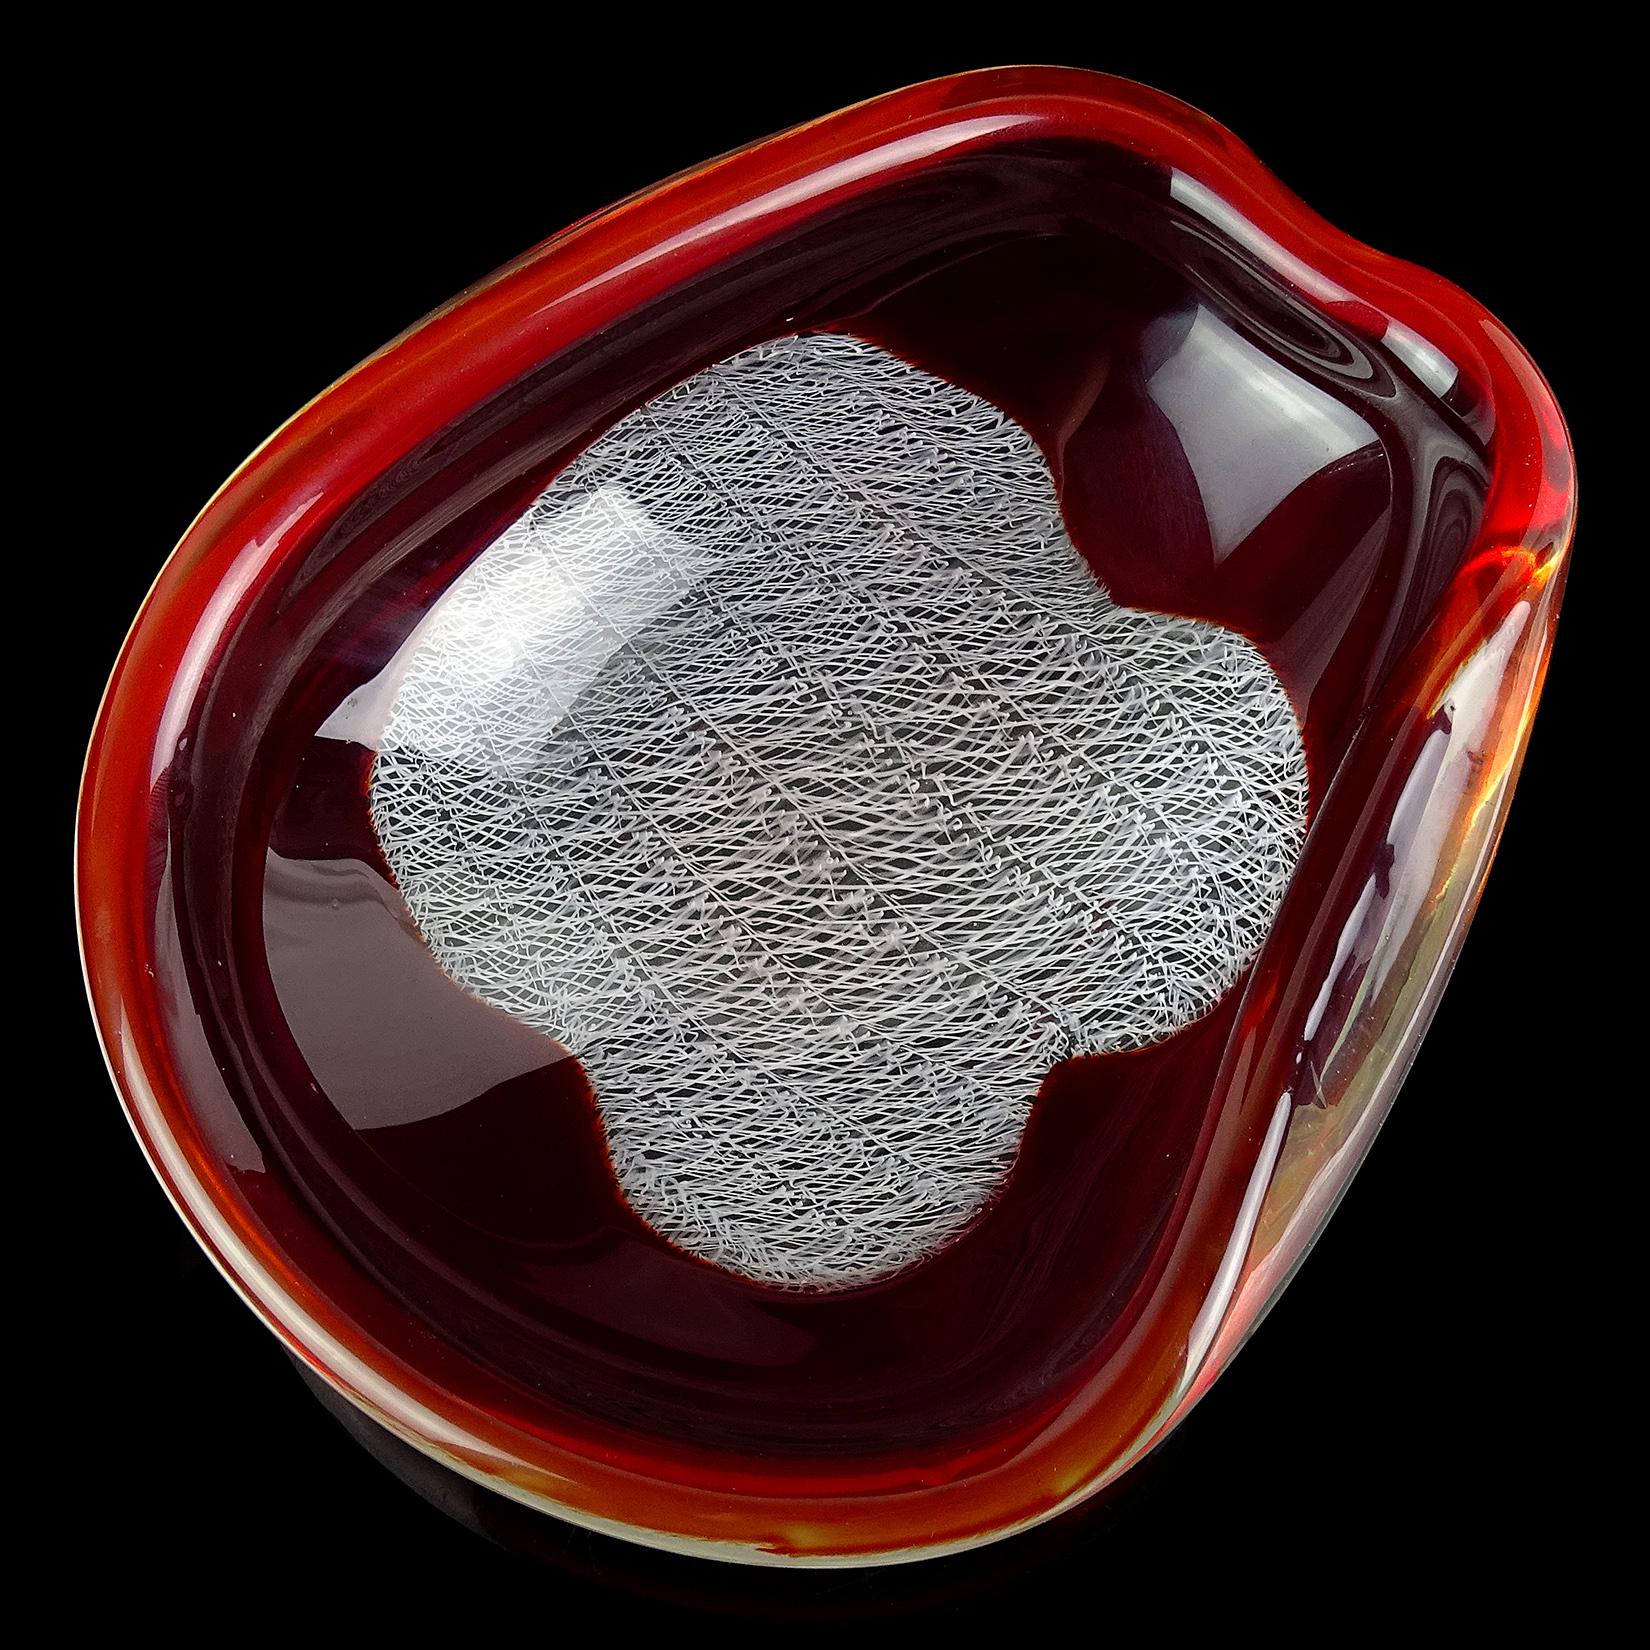 Beautiful, rare vintage Murano hand blown red and white ribbons Italian art glass bowl. Documented to designer Archimede Seguso, in the Merletto design, circa 1954. The color is a beautiful deep red, in perfect contrast to the white center. Would